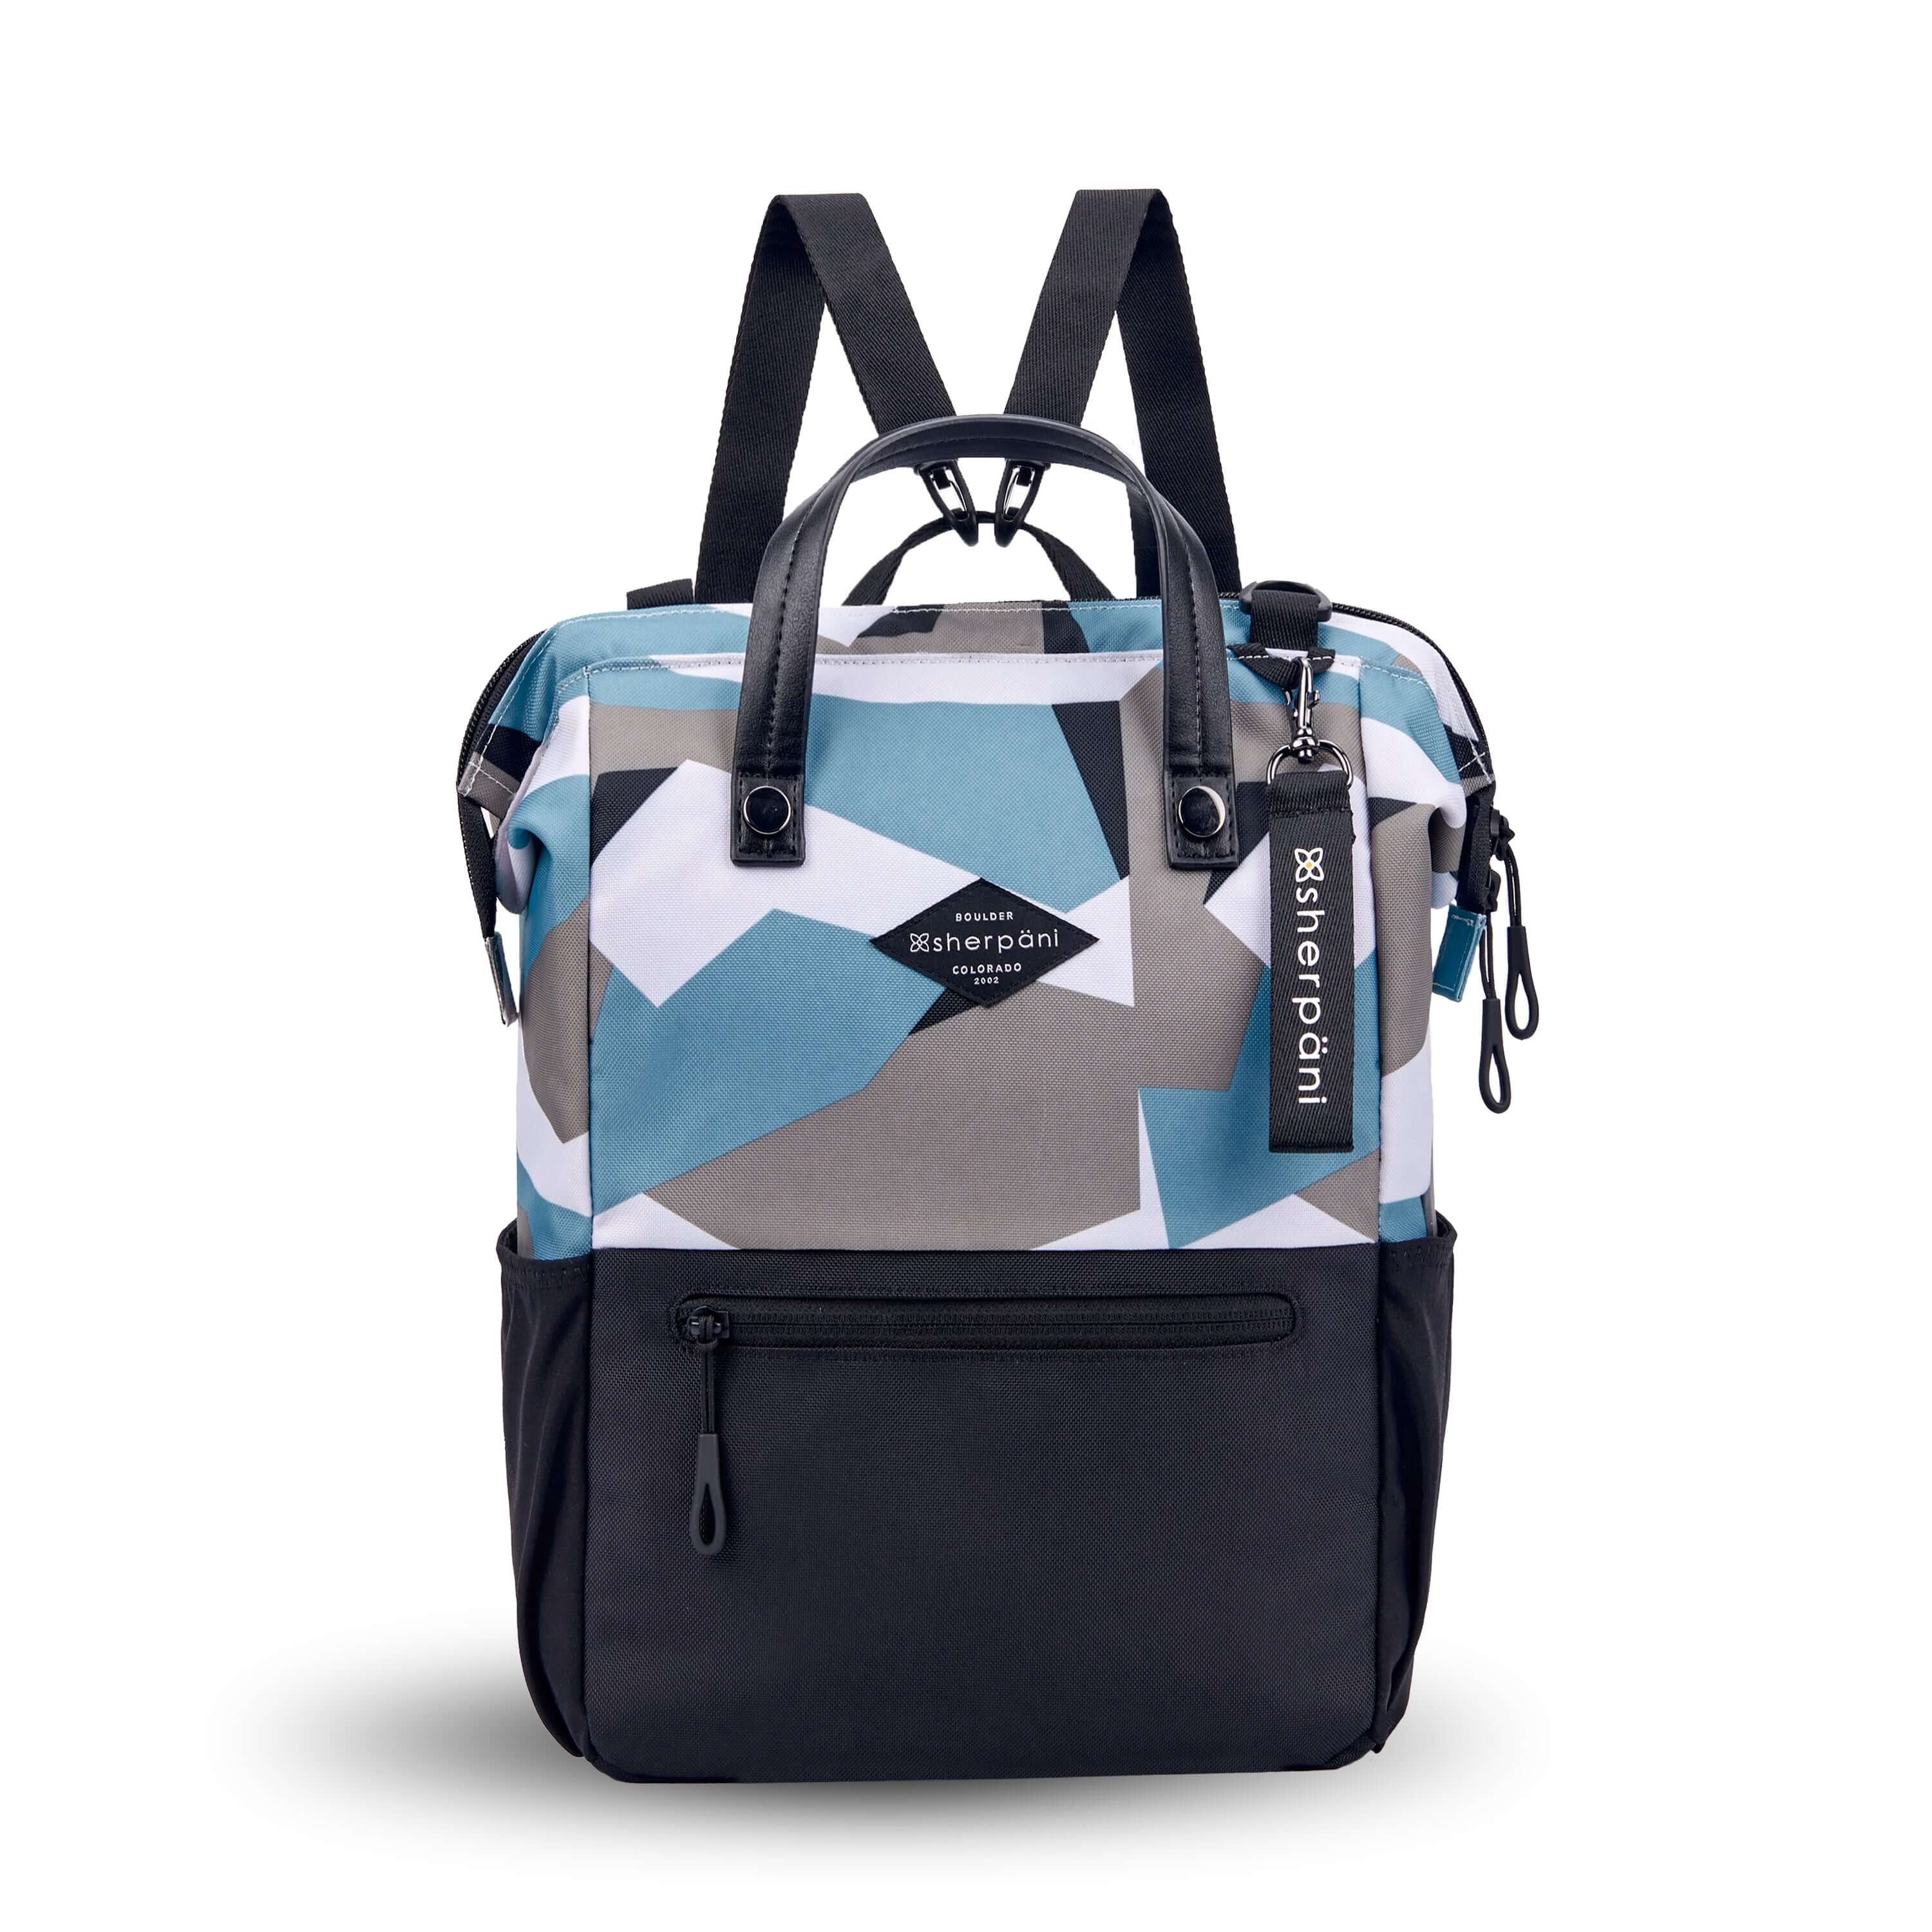 Flat front view of Sherpani three-in-one bag, the Dispatch in Summer Camo. The bag is two-toned: the top is a camouflage pattern of light blue, gray and white, the bottom is black. There is an external zipper pocket on the front panel. Easy-pull zippers are accented in black. A branded Sherpani keychain is clipped to the upper right corner. Water bottle holders sit on either side of the bag. It has short tote handles and adjustable straps that can function for a backpack or crossbody. 